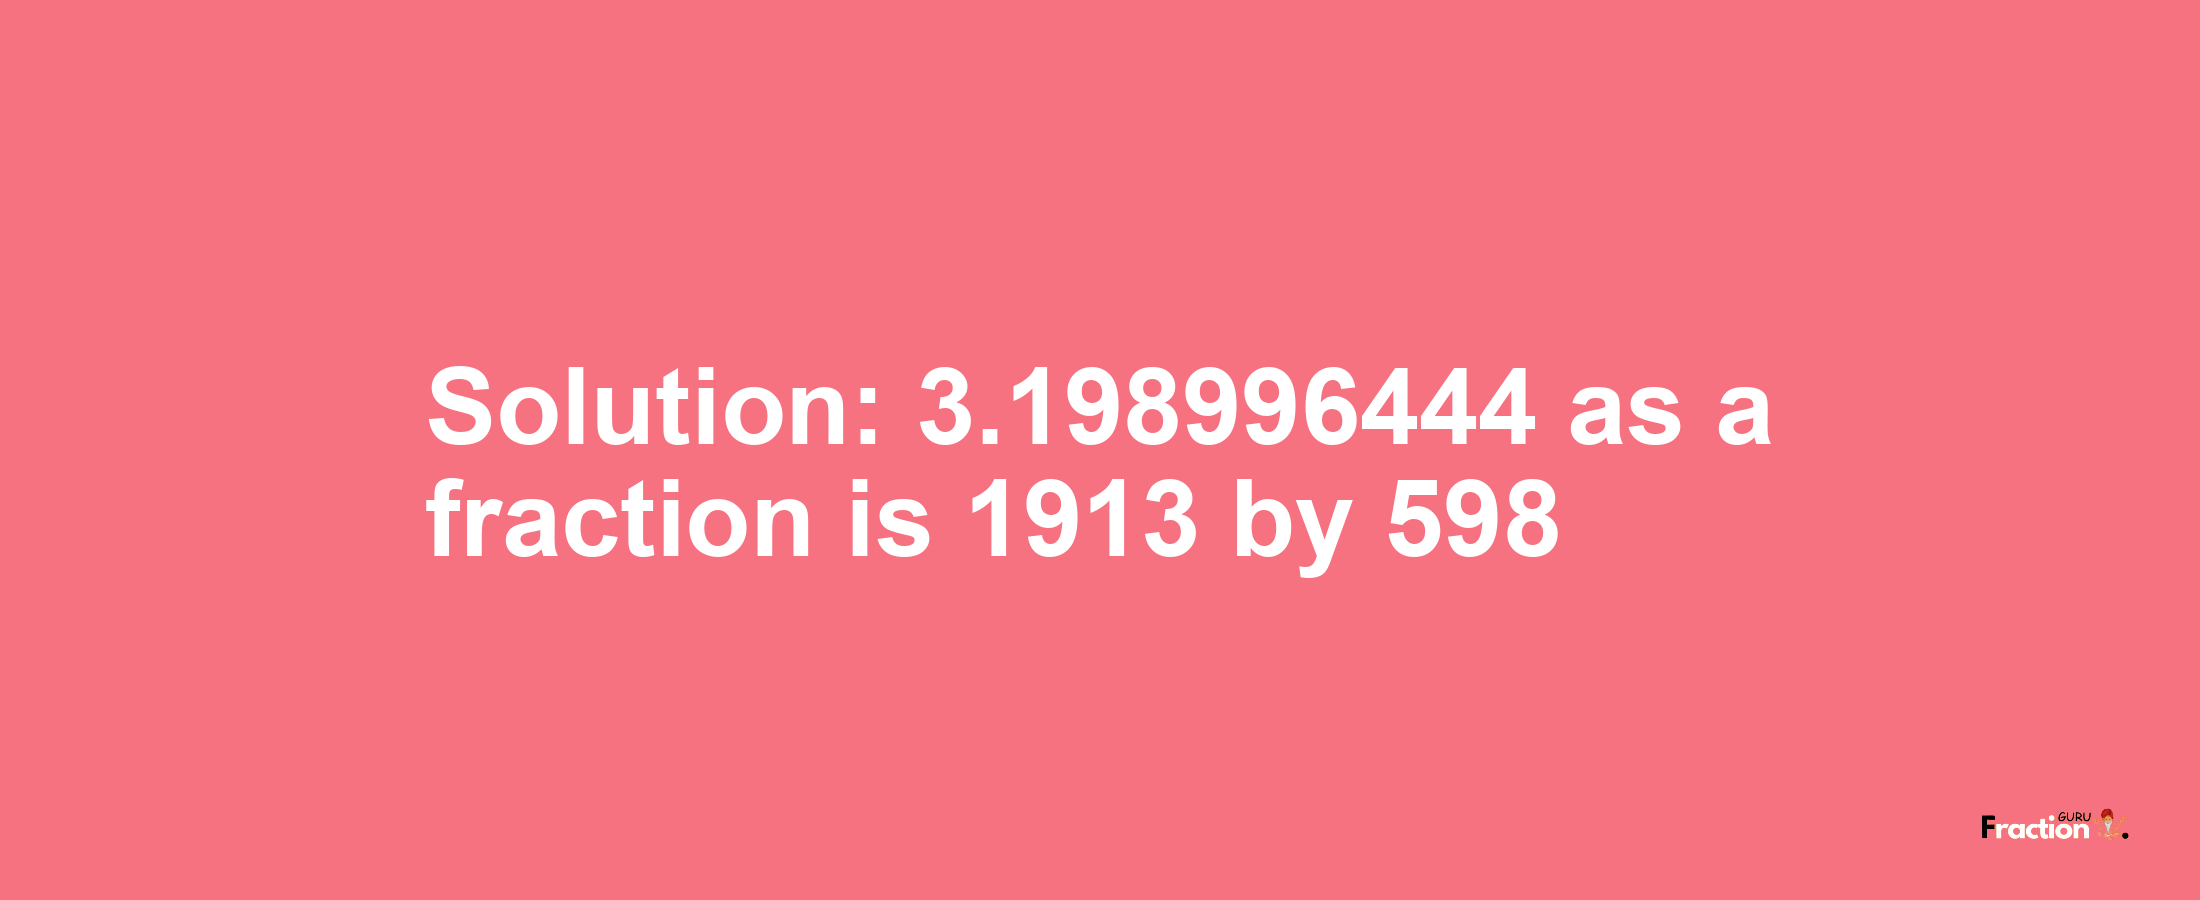 Solution:3.198996444 as a fraction is 1913/598